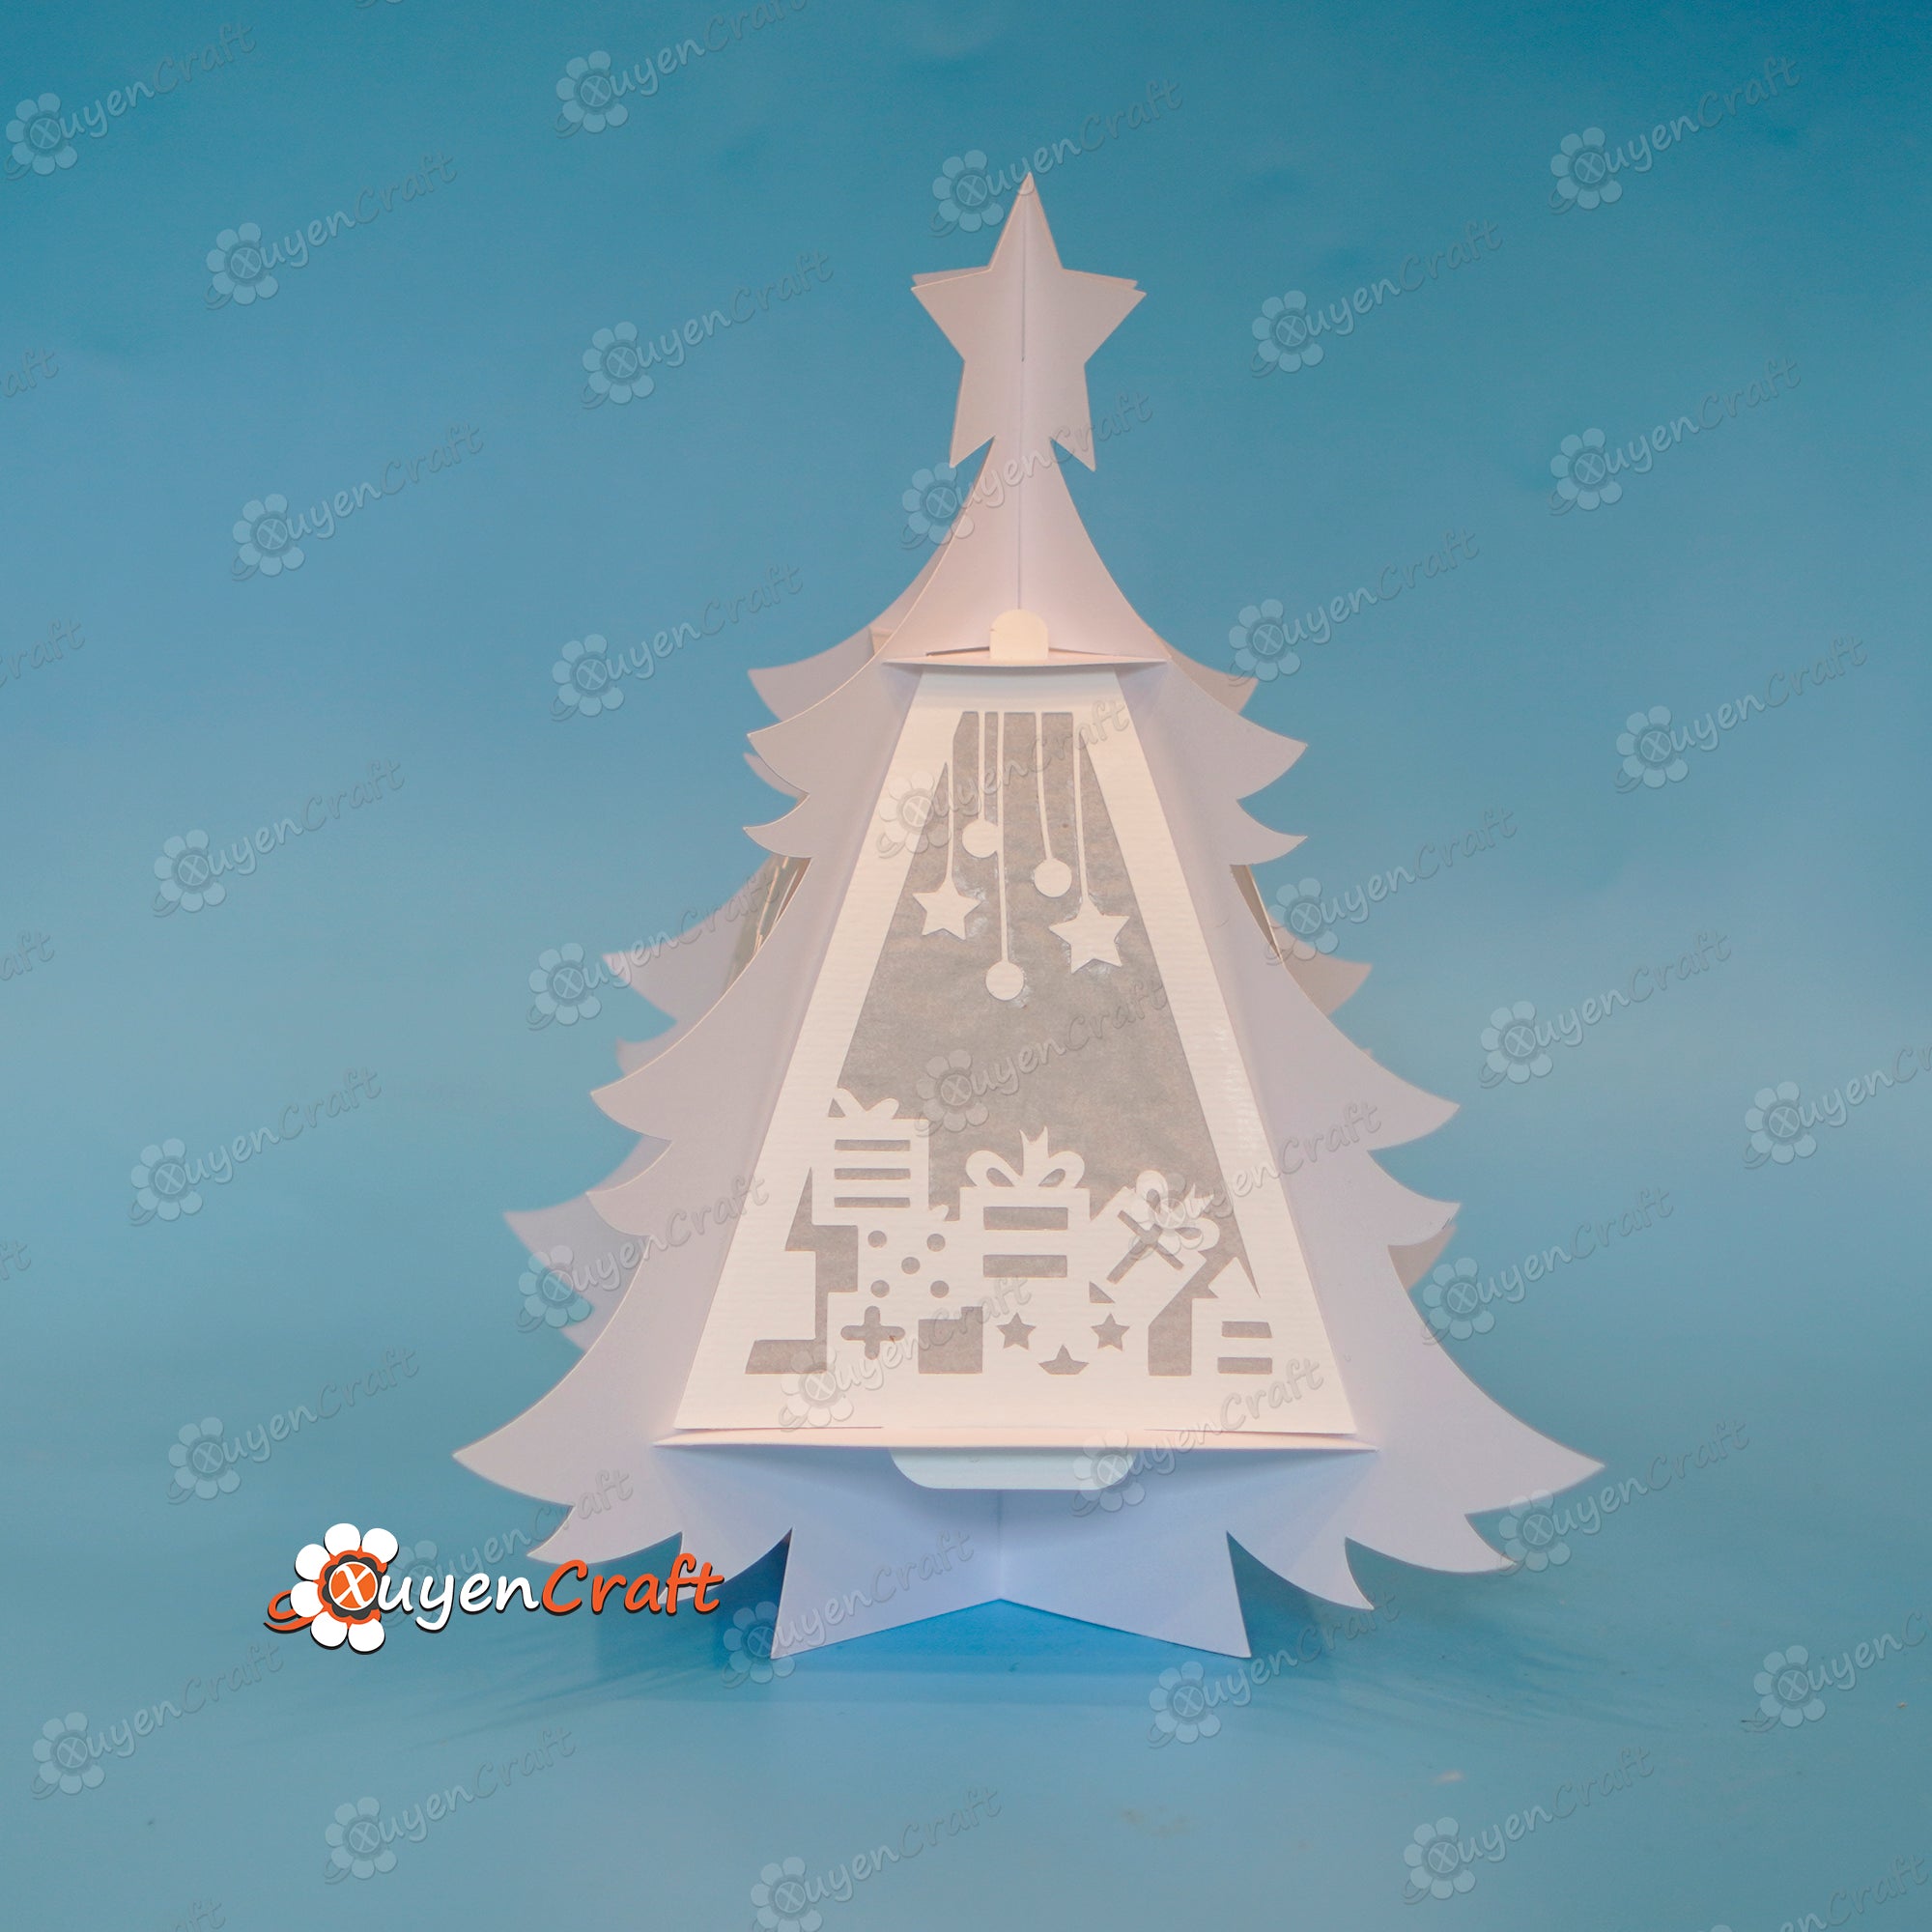 Pack 3 Christmas Tree Lantern SVG for Cricut Projects - Paper Cut Template For Christmas